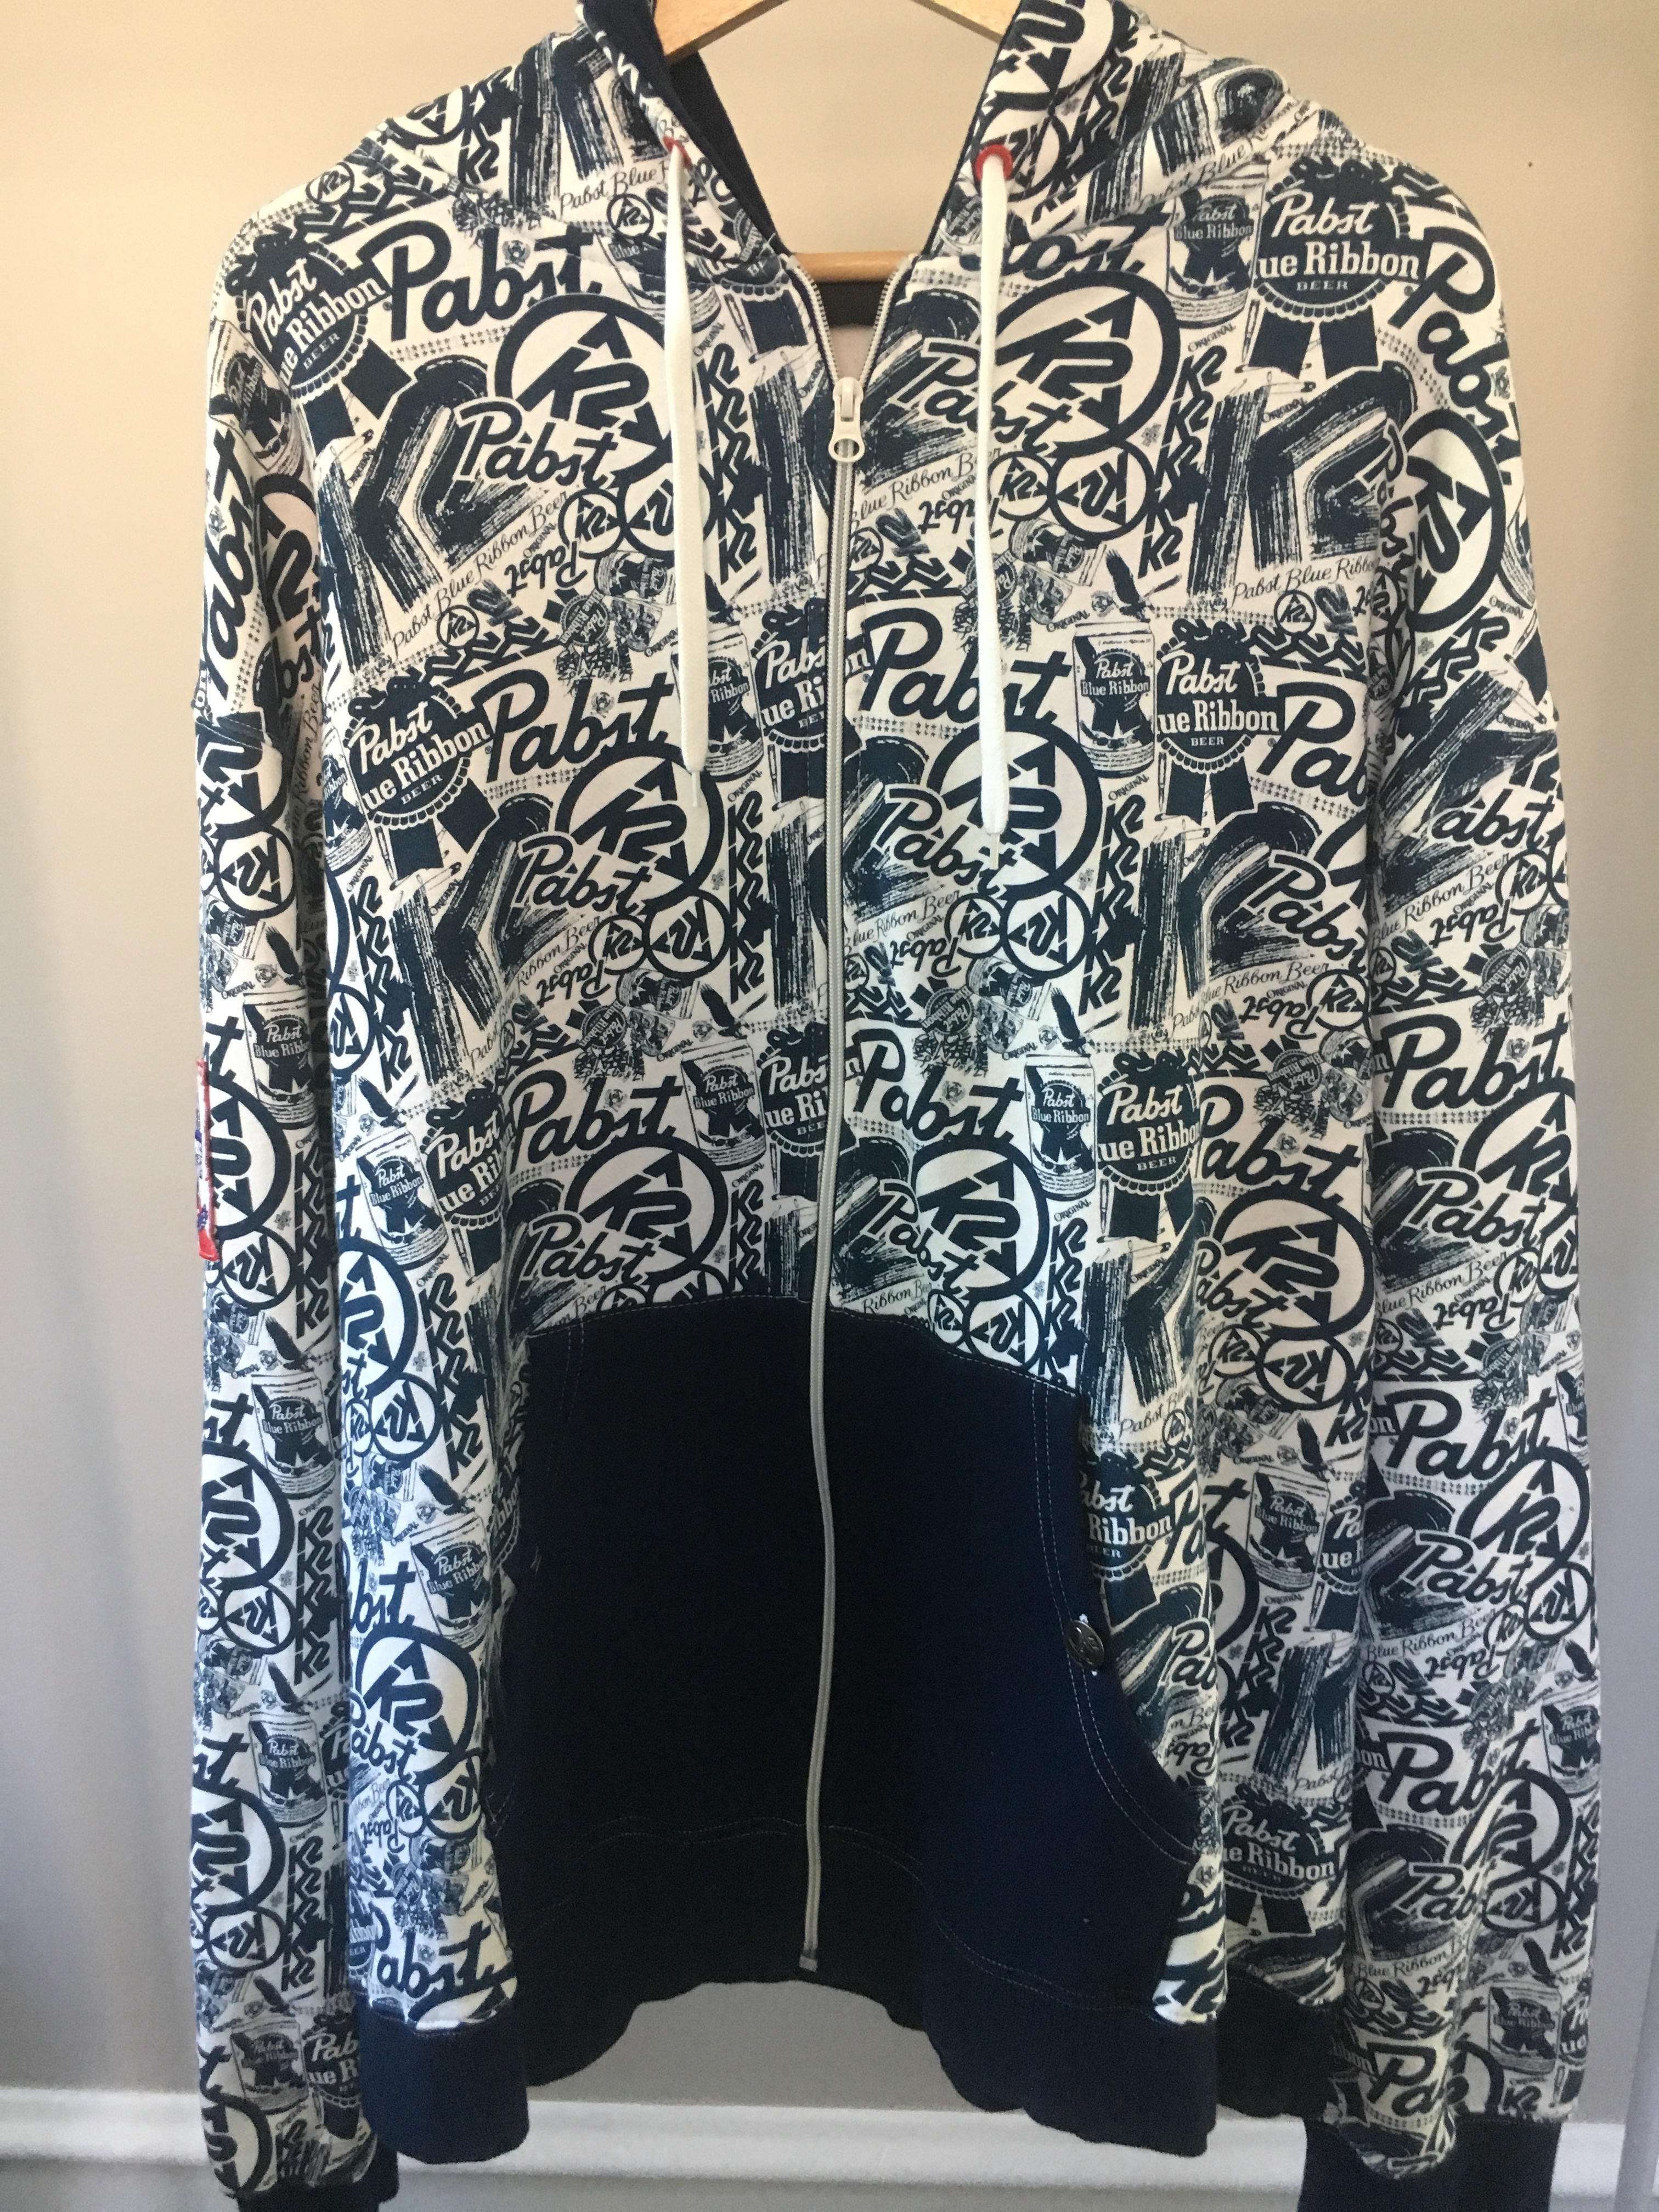 K2 PBR Collab Hoodie - Sell and Trade - Newschoolers.com